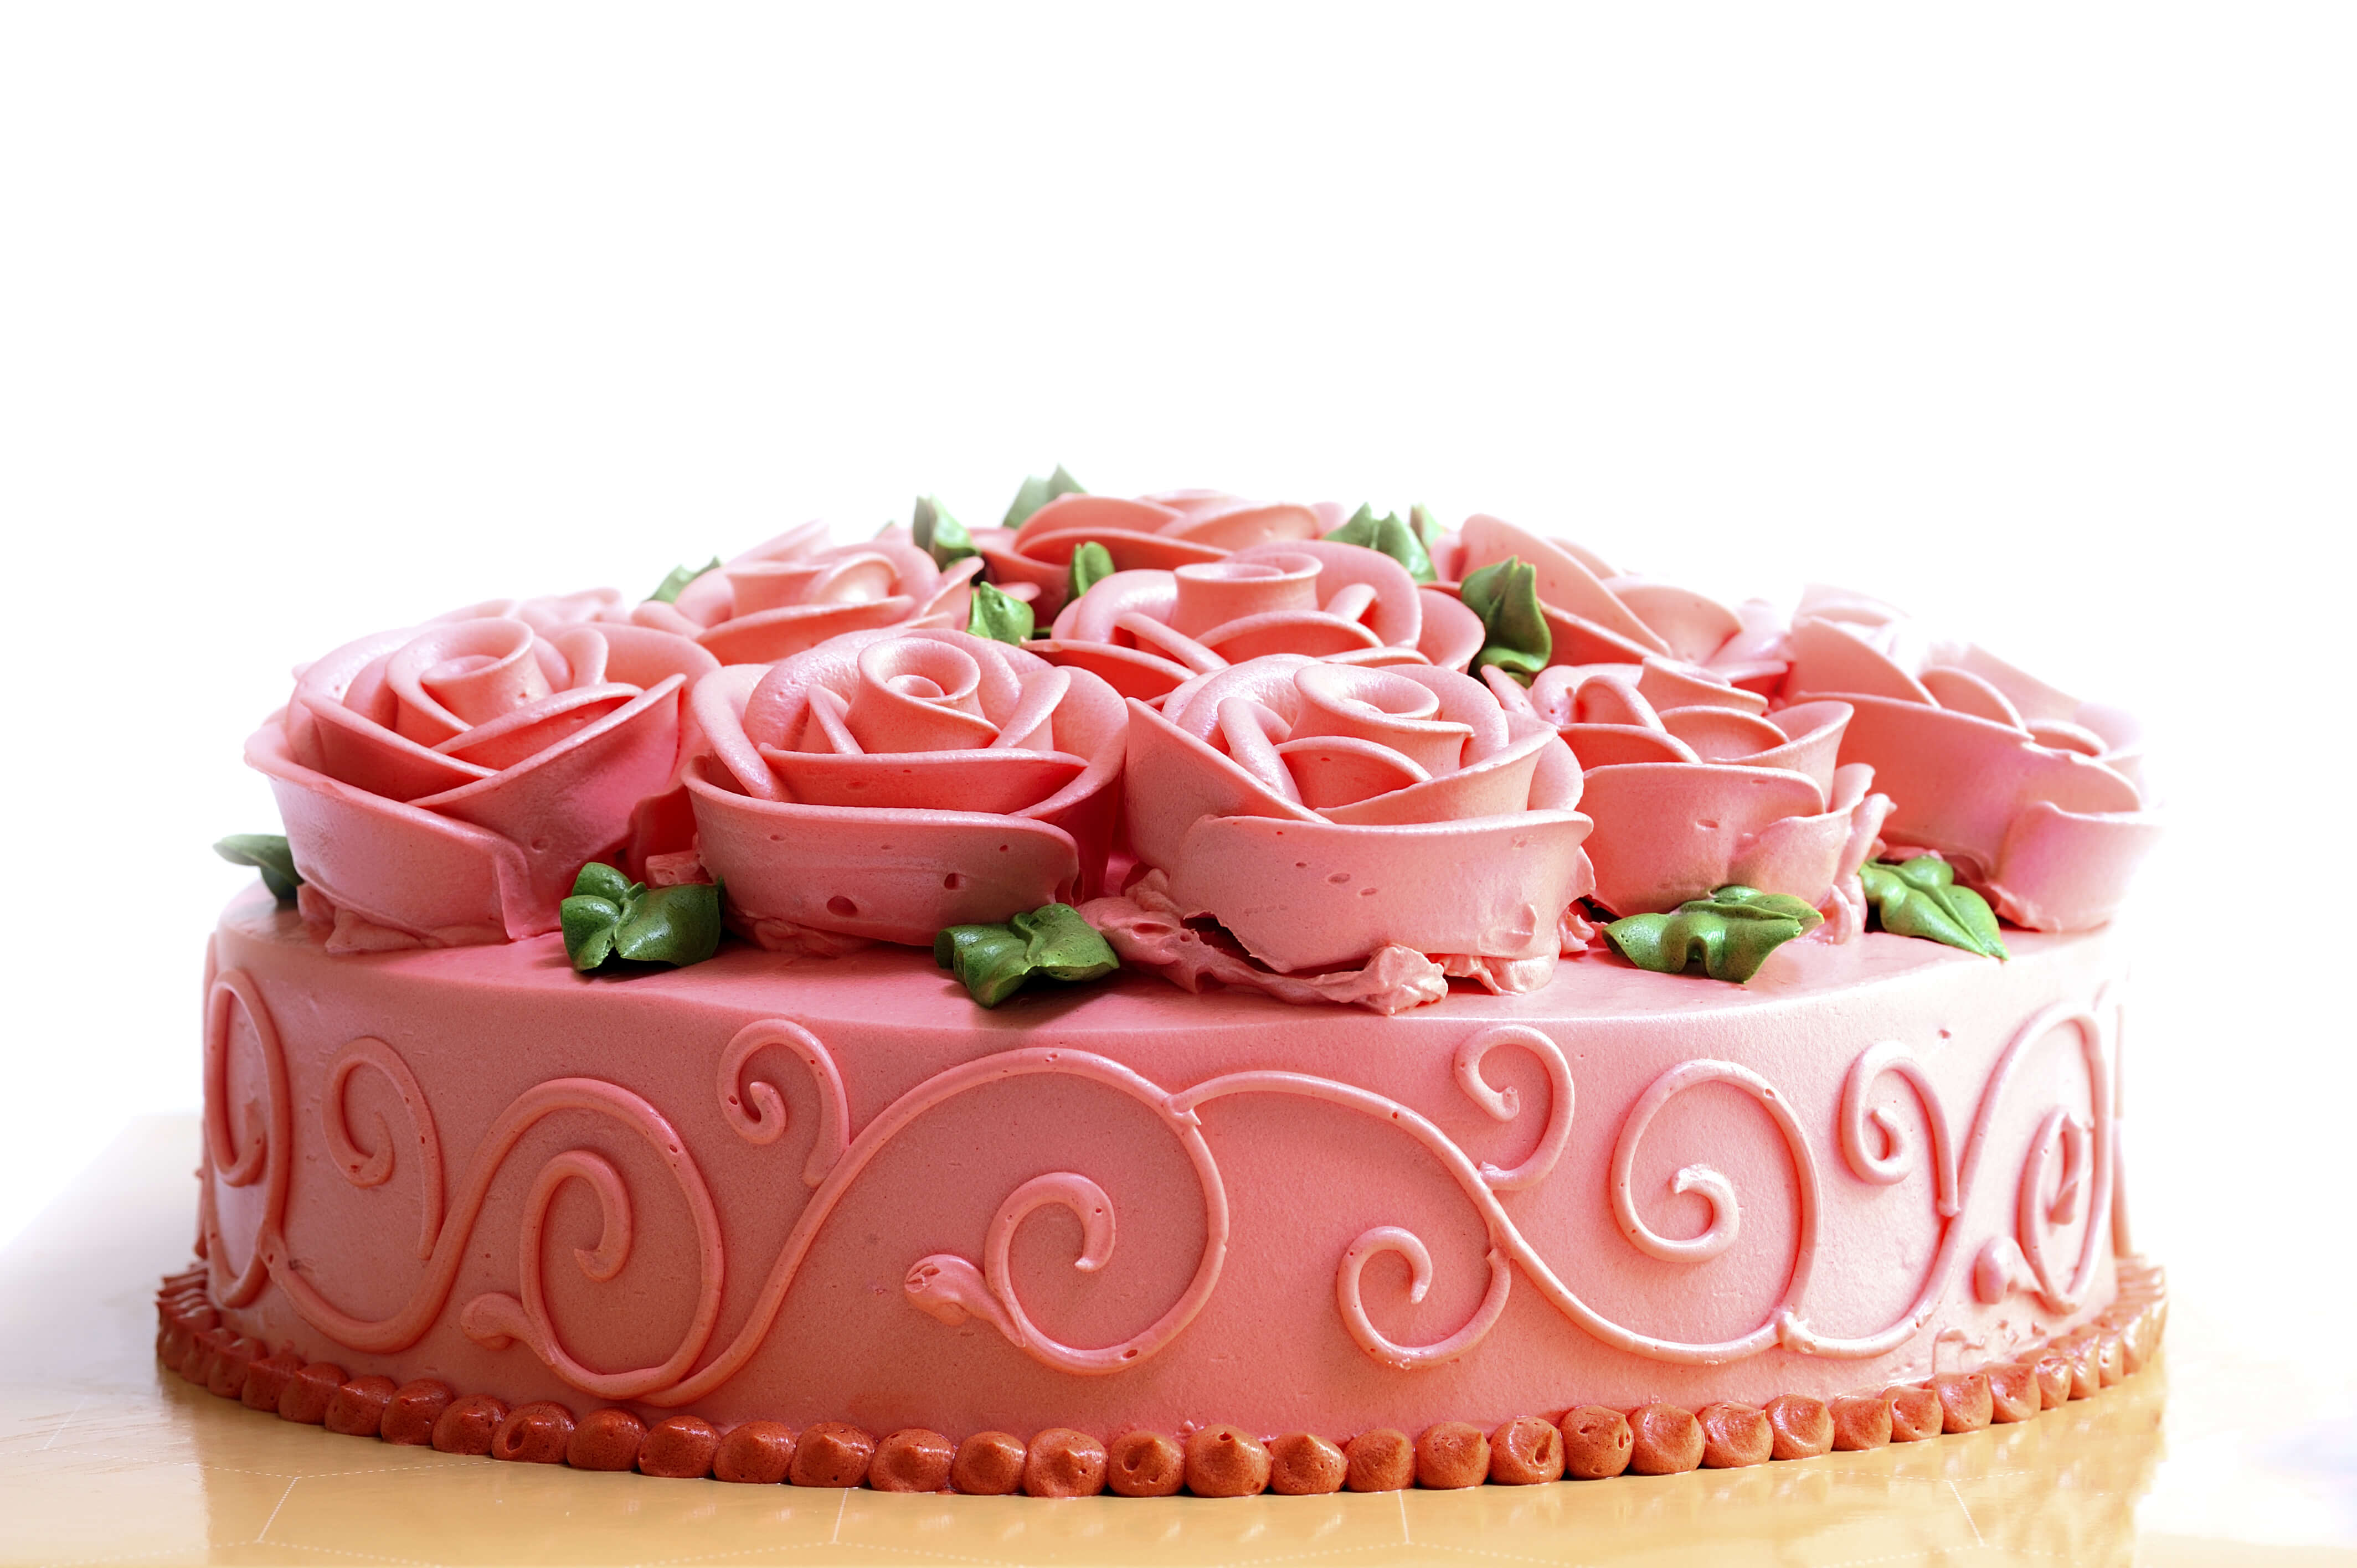 A Beginner’s Guide to Cake Decorating (with Infographic)